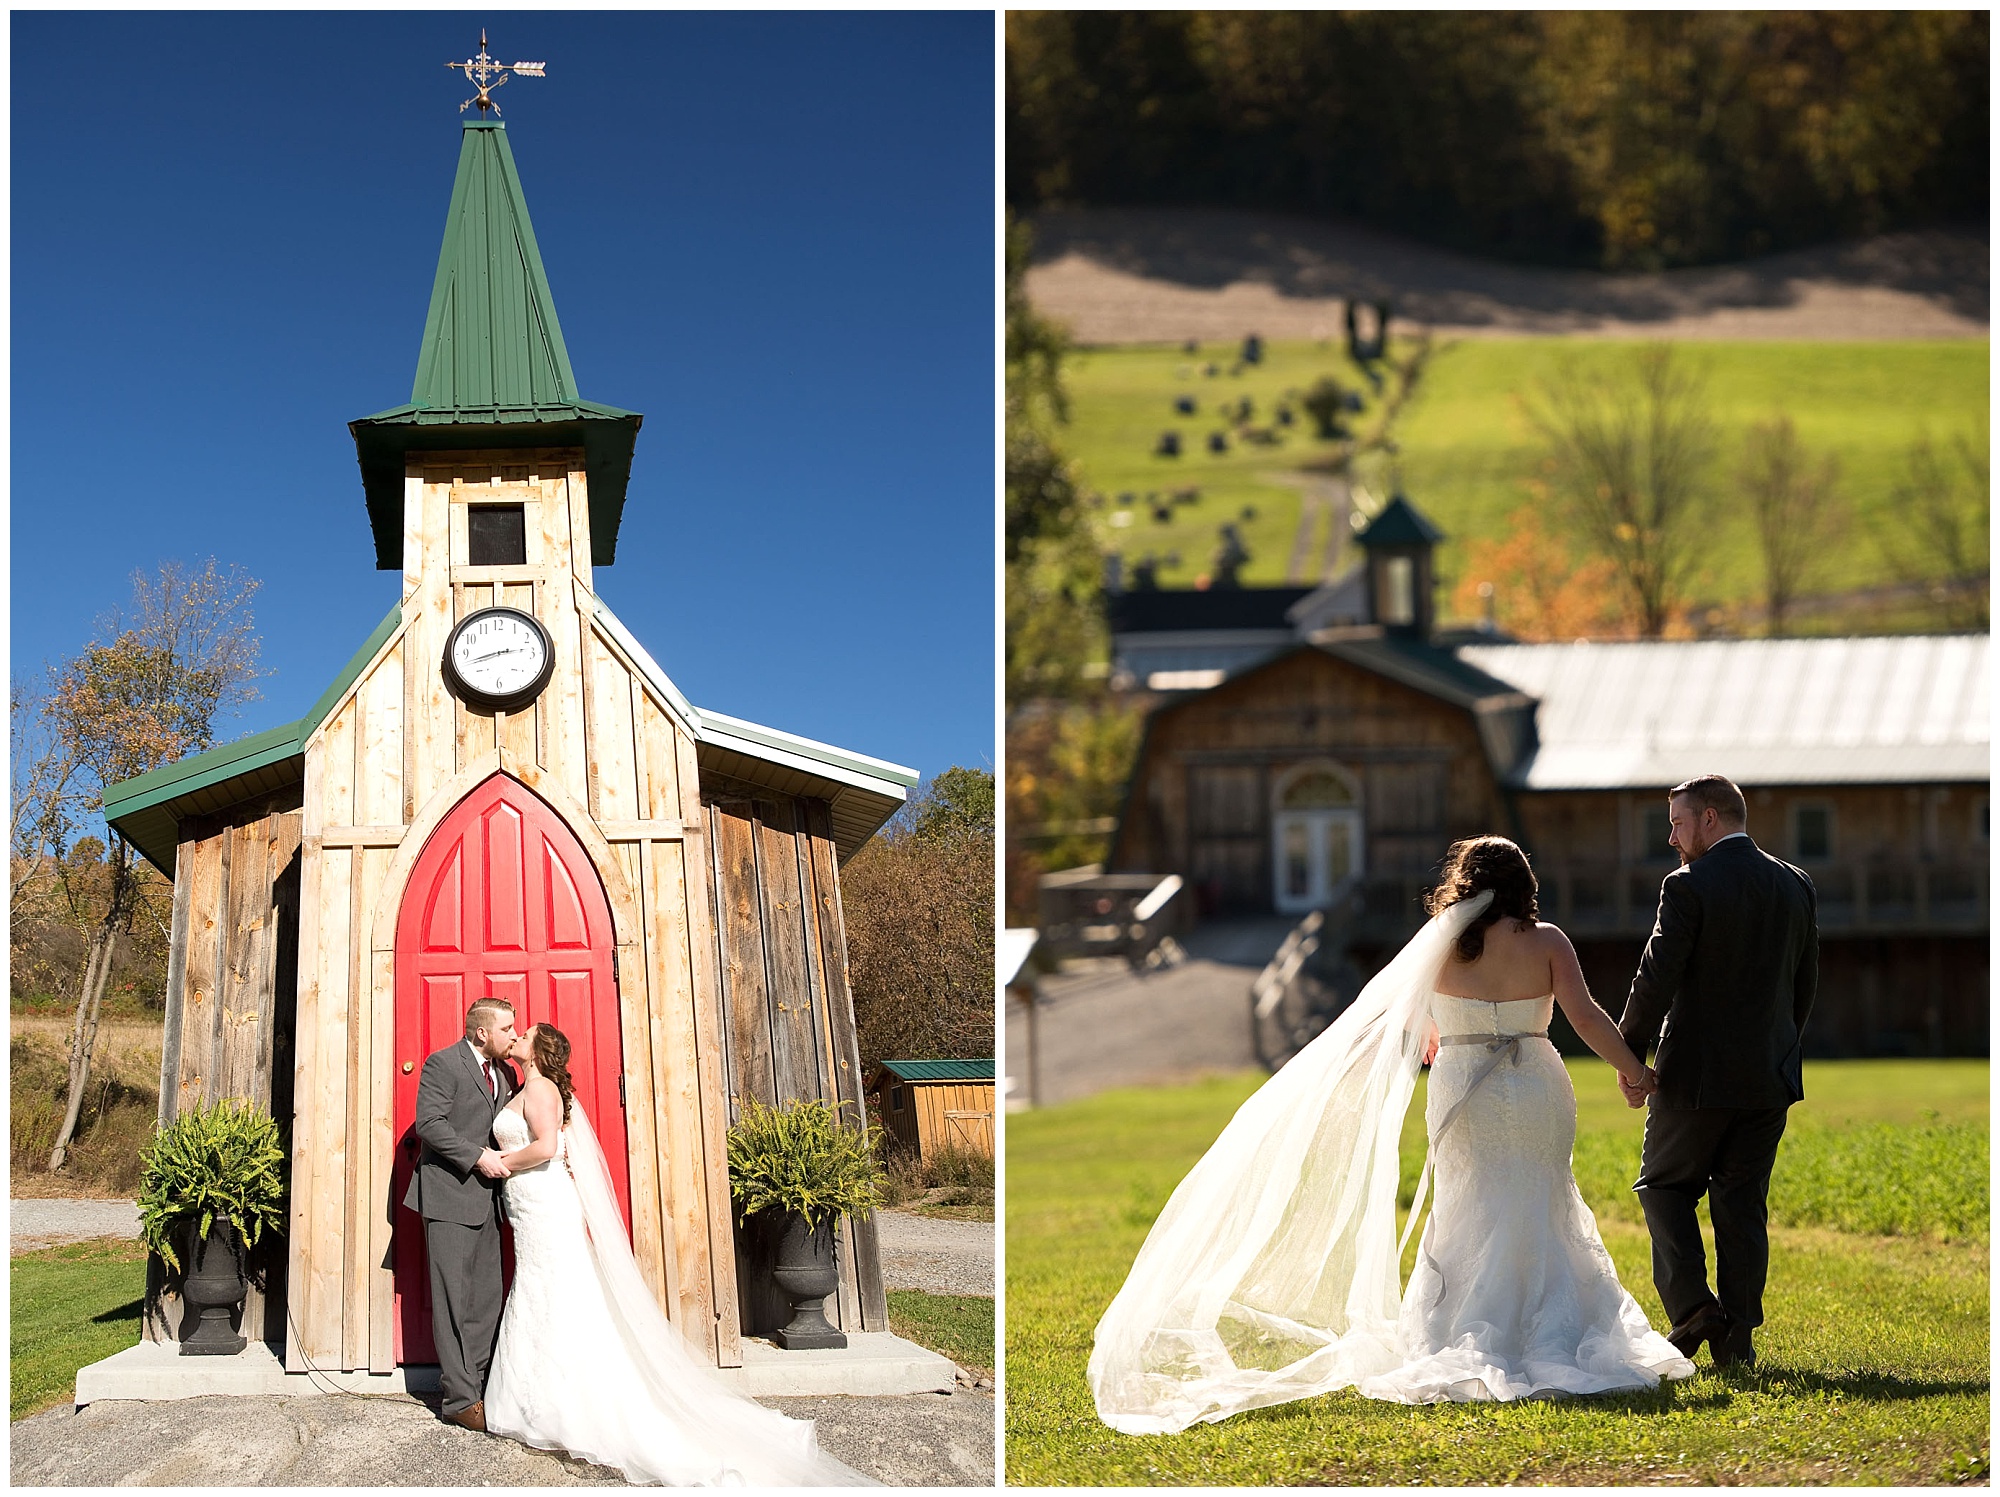 Two photos. First is of a bride and groom kissing in front of a small chapel. The second is of them walking hand in hand away from the camera